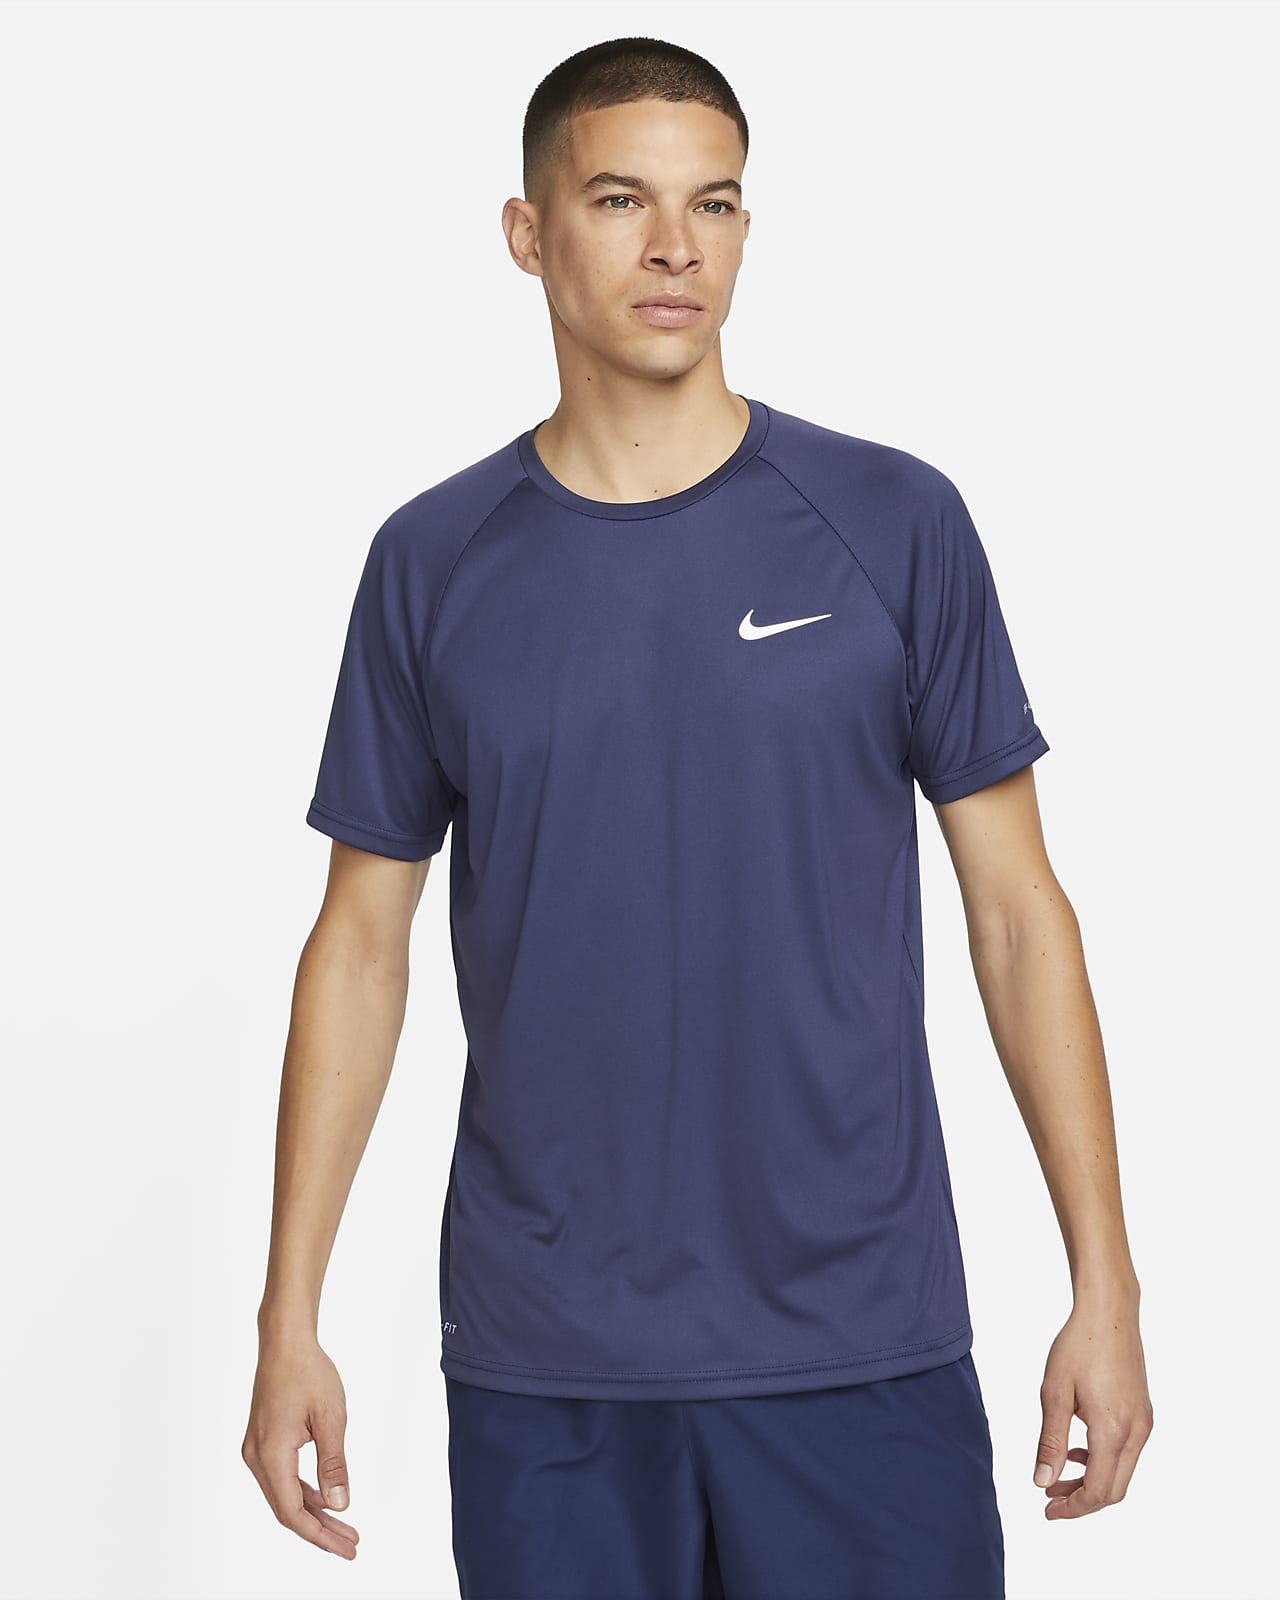 Stay cool and stylish with this Nike NBA compression tank top